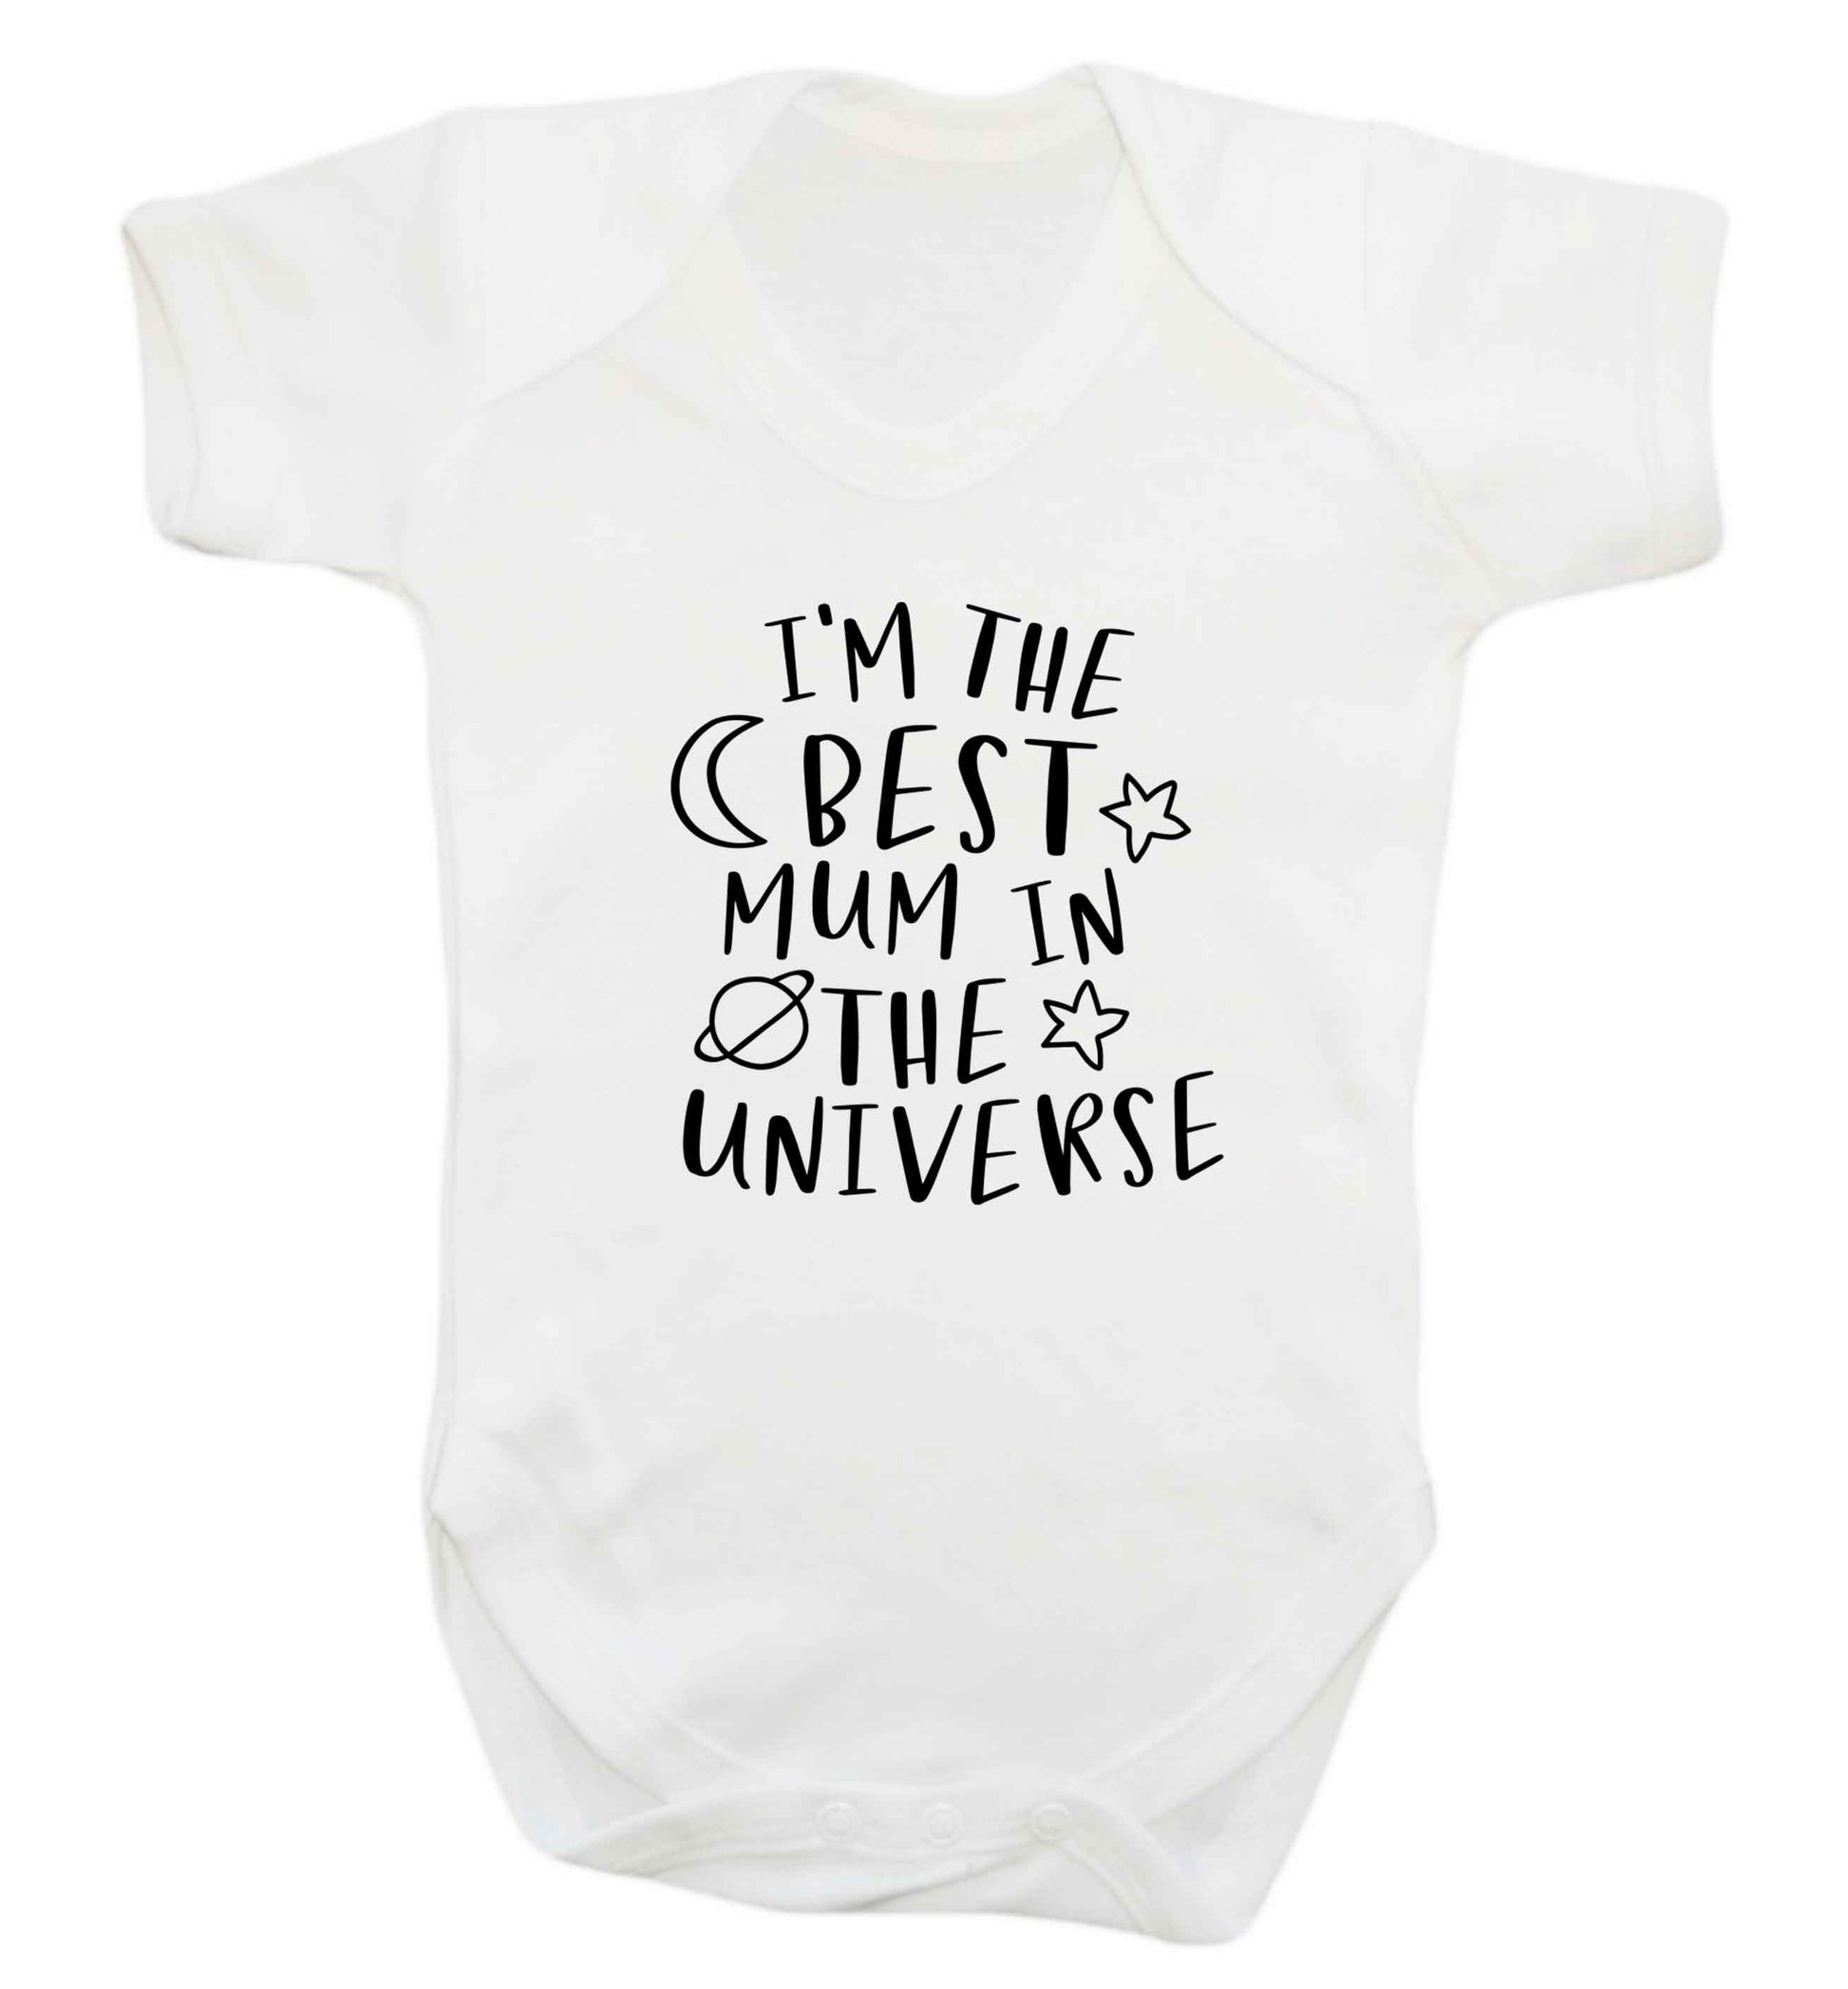 I'm the best mum in the universe baby vest white 18-24 months